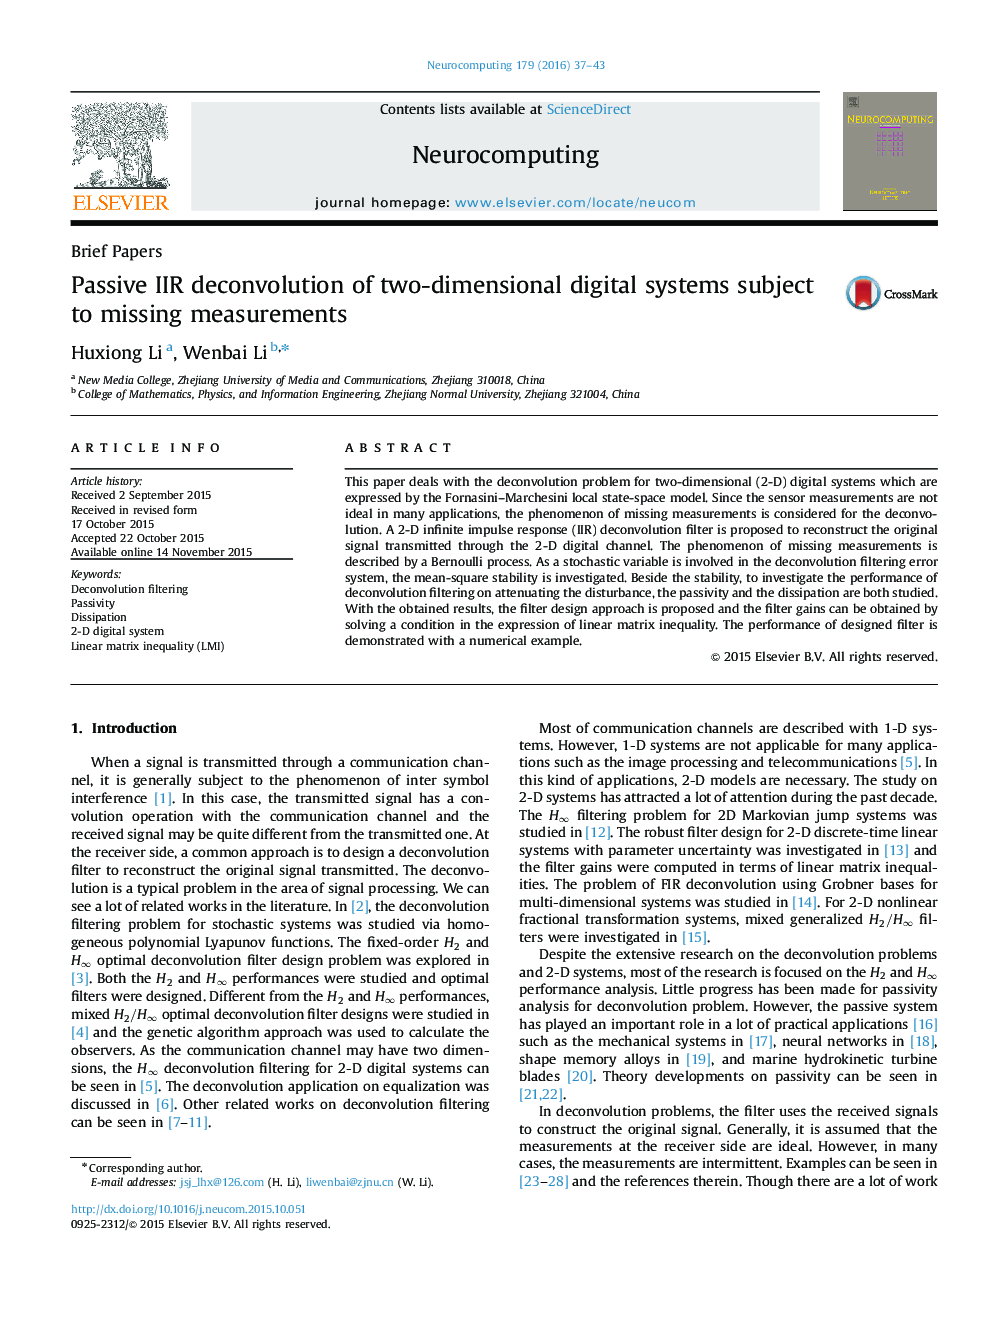 Passive IIR deconvolution of two-dimensional digital systems subject to missing measurements